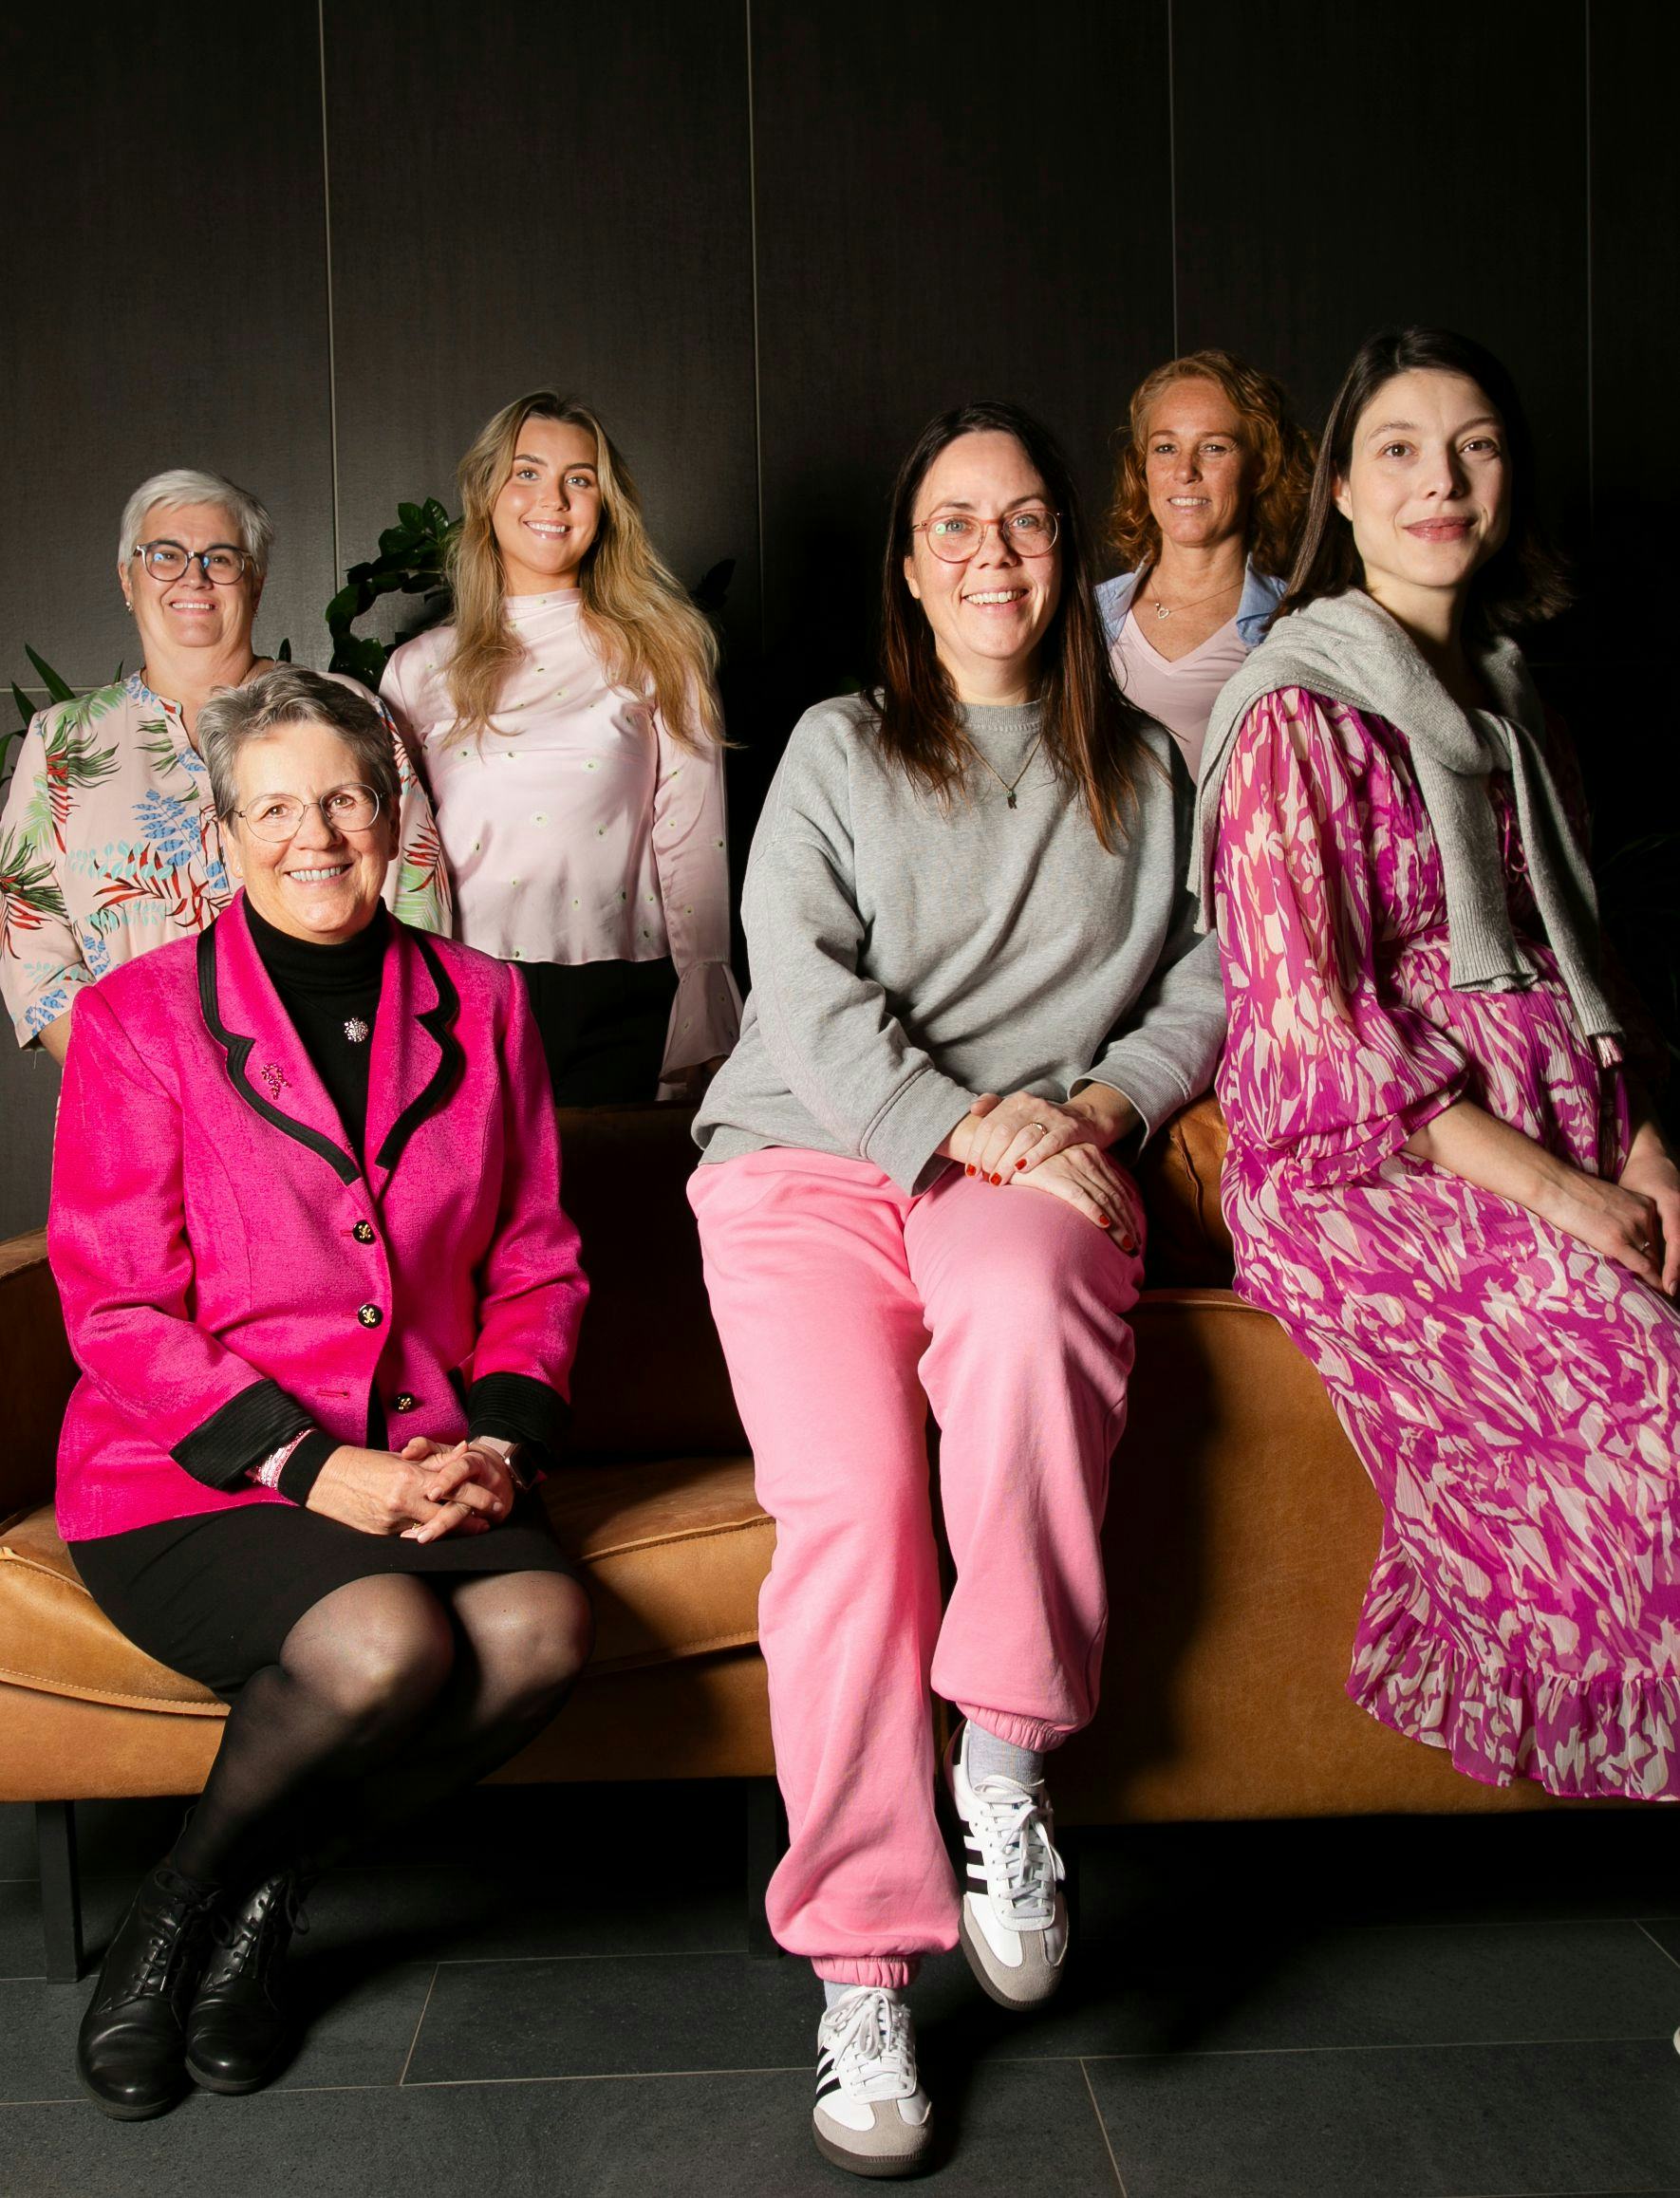 A group of six women posing in an indoor setting with dim lighting. They have varying styles of dresses from casual to formal.